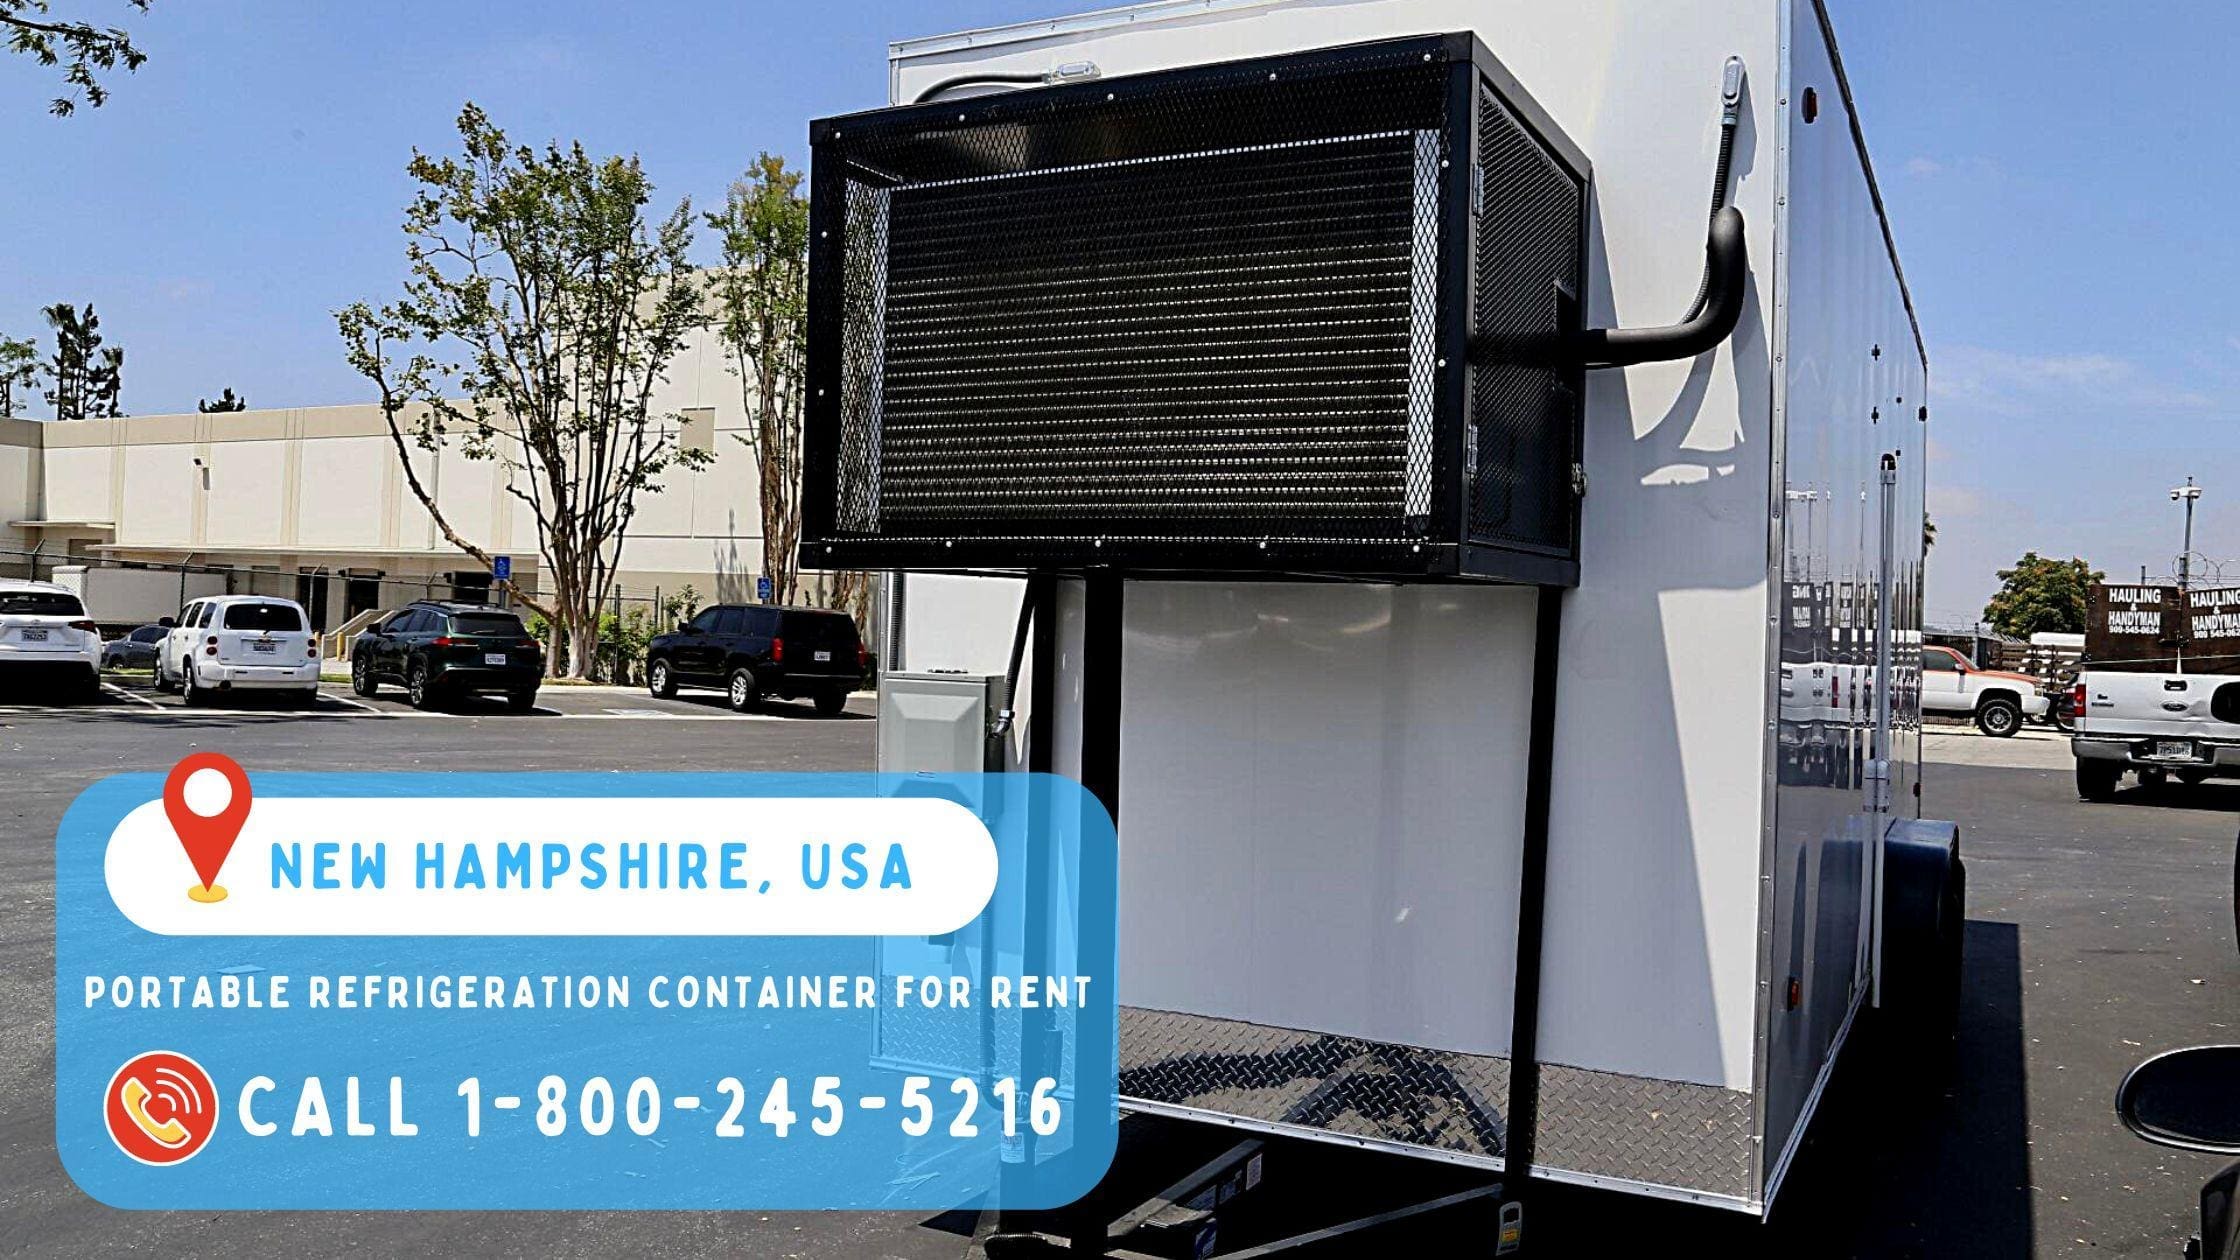 https://b3366852.smushcdn.com/3366852/wp-content/uploads/2022/12/Portable-Refrigeration-Container-for-rent-in-New-Hampshire-1.jpg?lossy=2&strip=1&webp=1